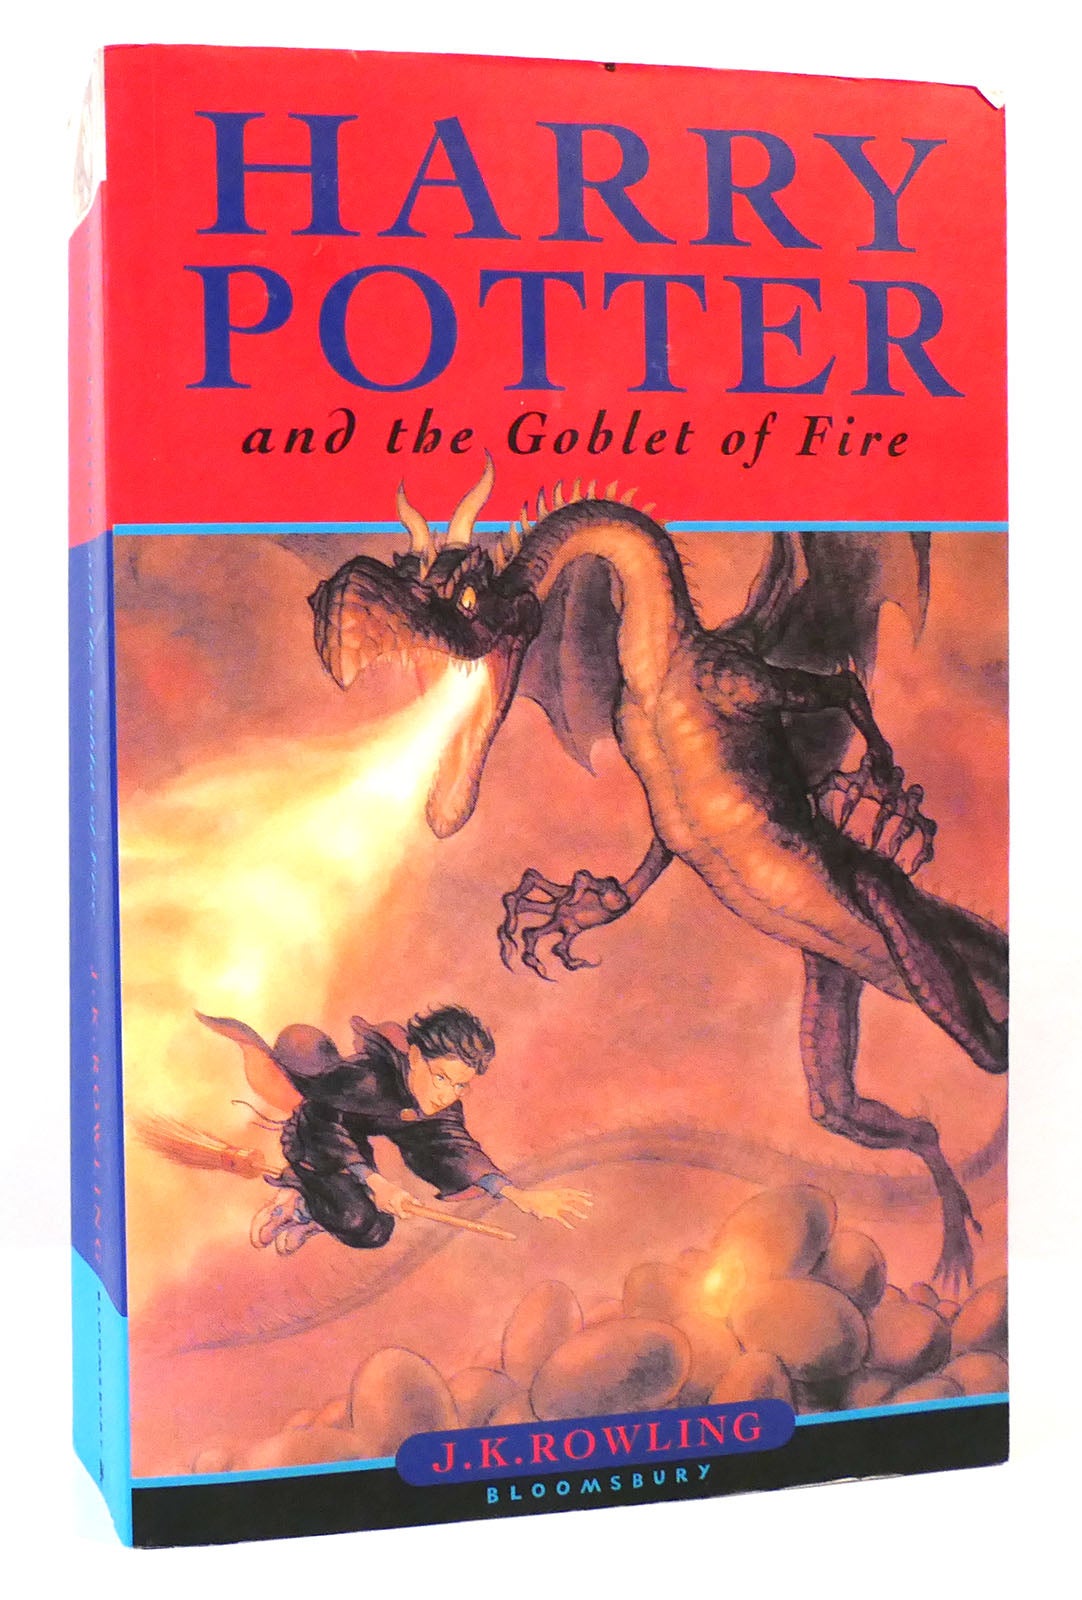 HARRY POTTER AND THE GOBLET OF FIRE by J. K. Rowling on Rare Book Cellar